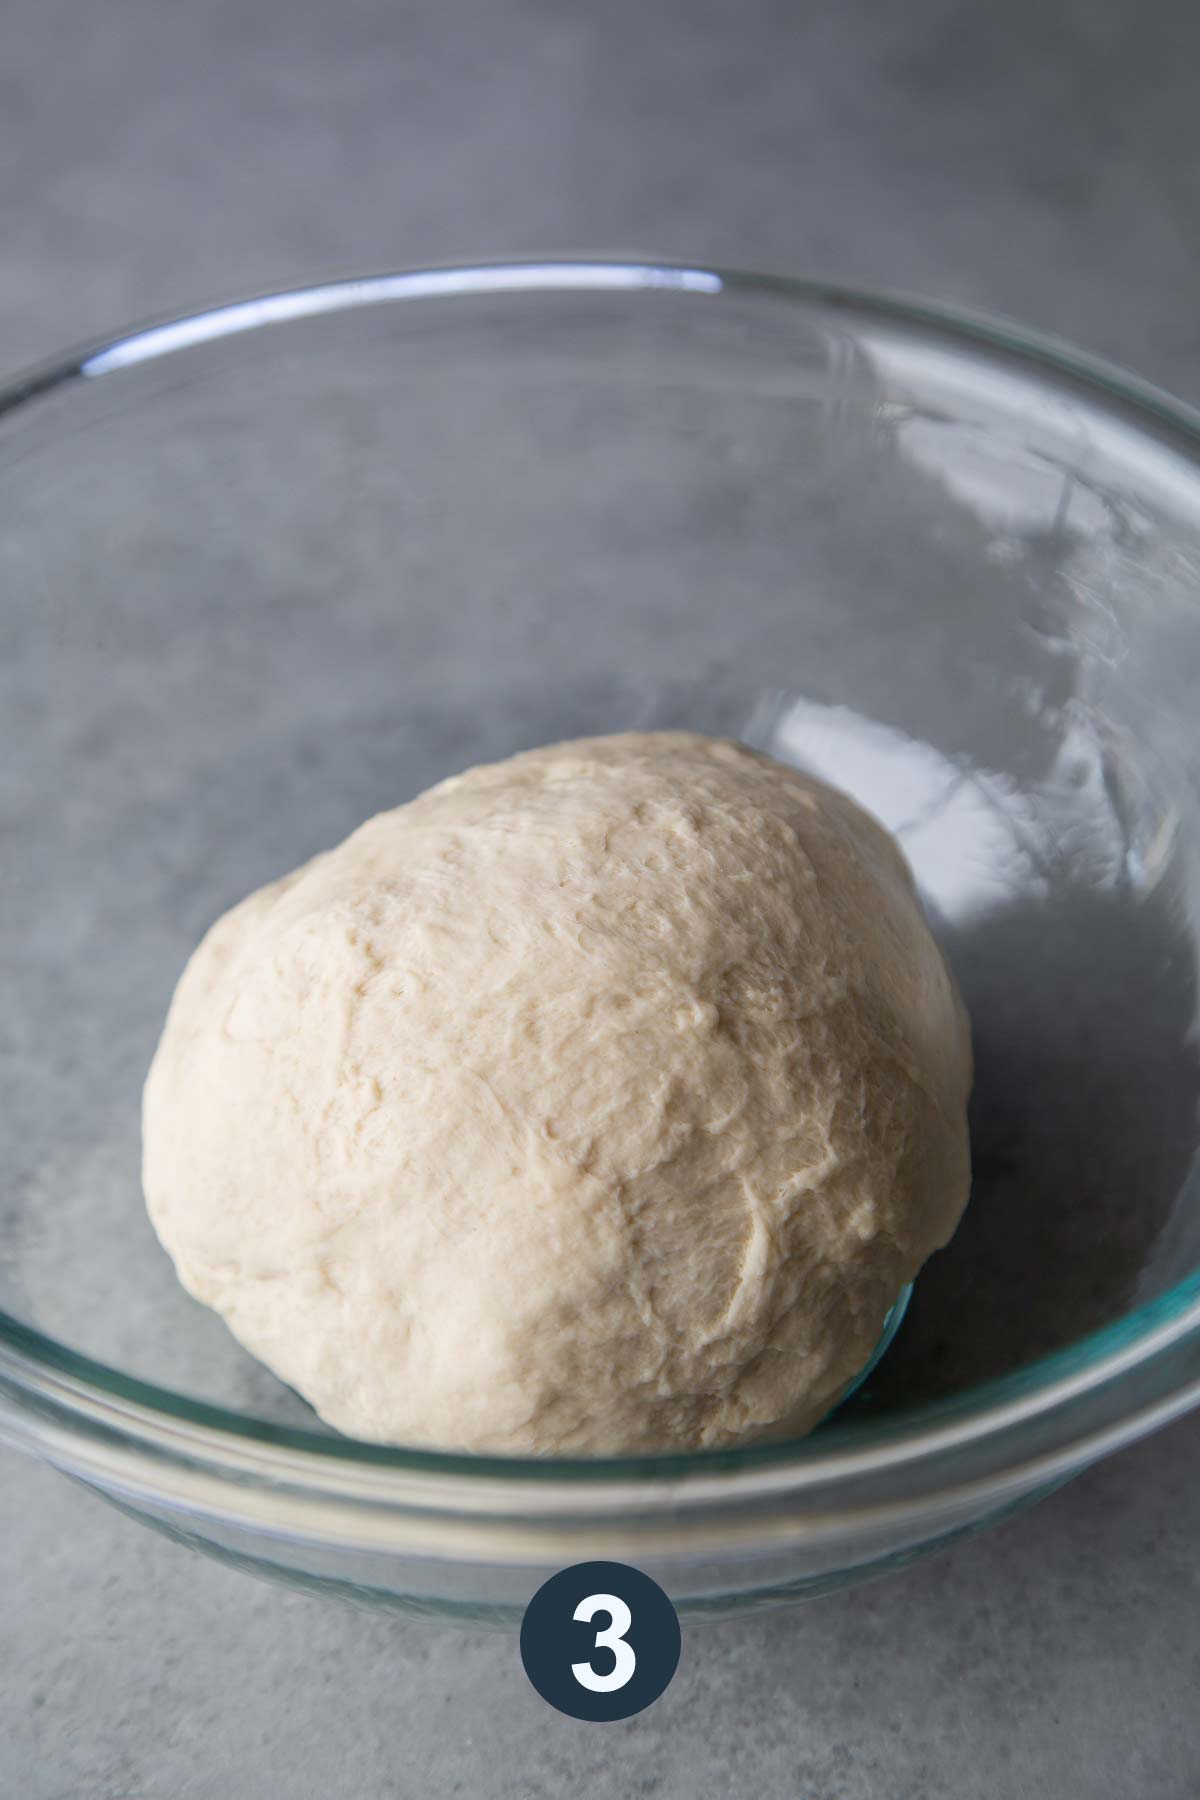 transfer dough to clean bowl and let rest.